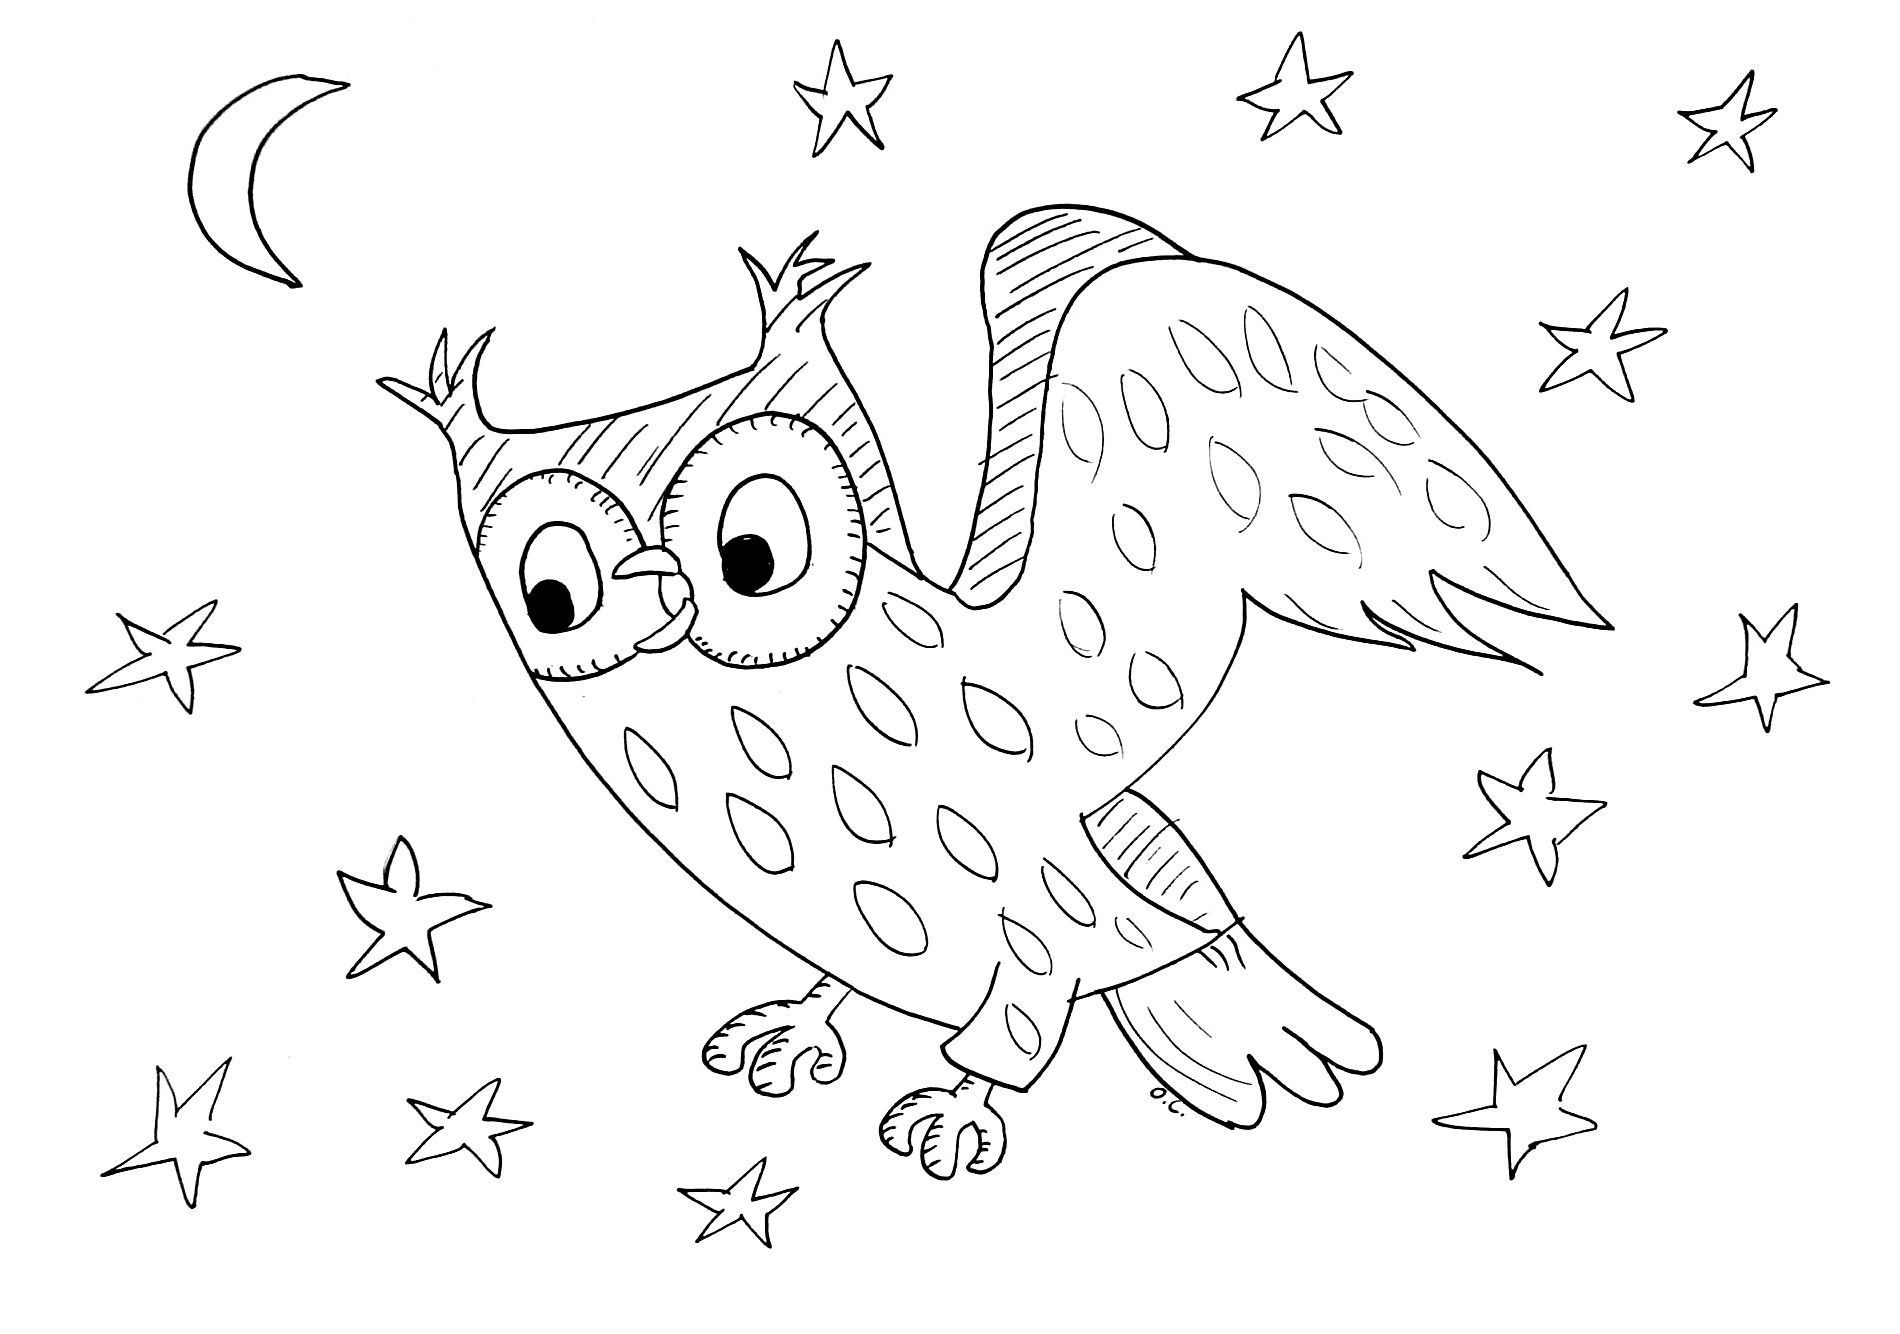 Free Birds coloring page to print and color